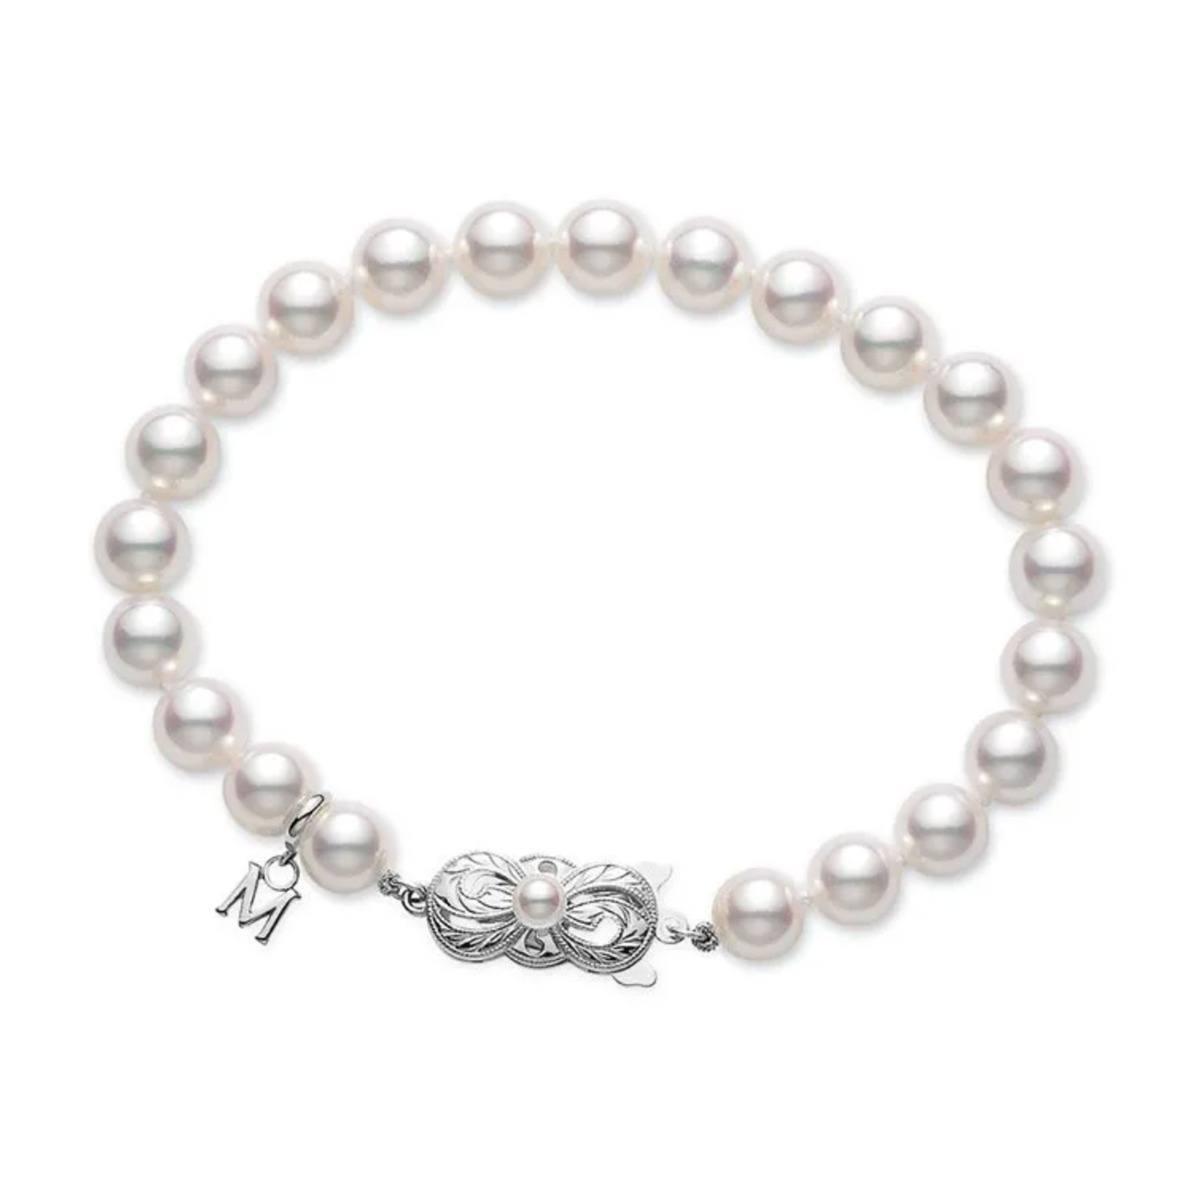 Mikimoto 7.5-7mm A Pearl Strand Bracelet in White Gold